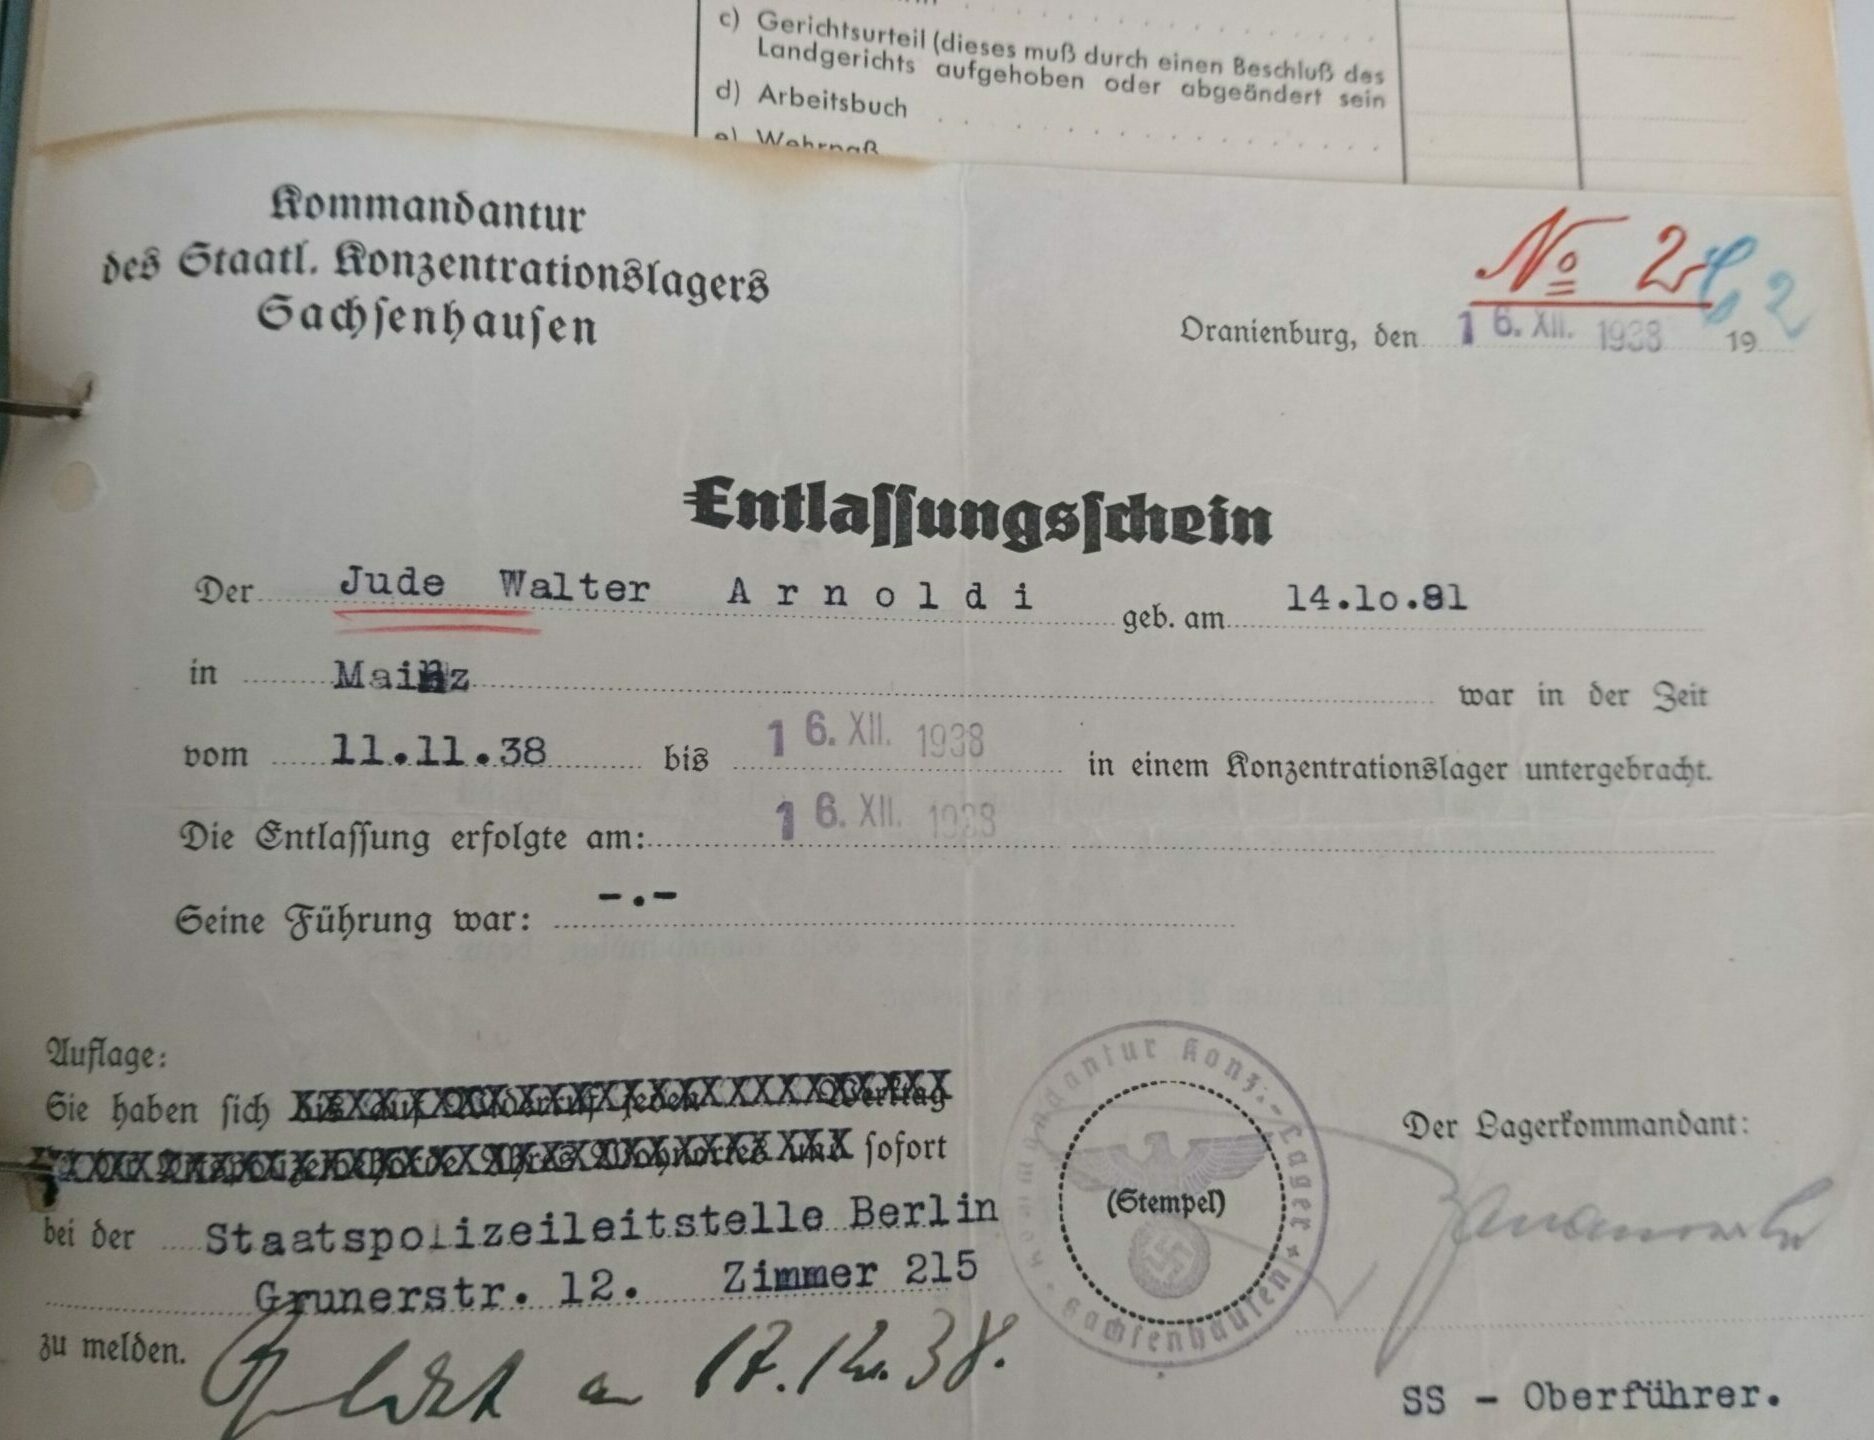 Arnoldi's certificate of release from the Sachsenhausen concentration camp, image source Compensation Authority Berlin